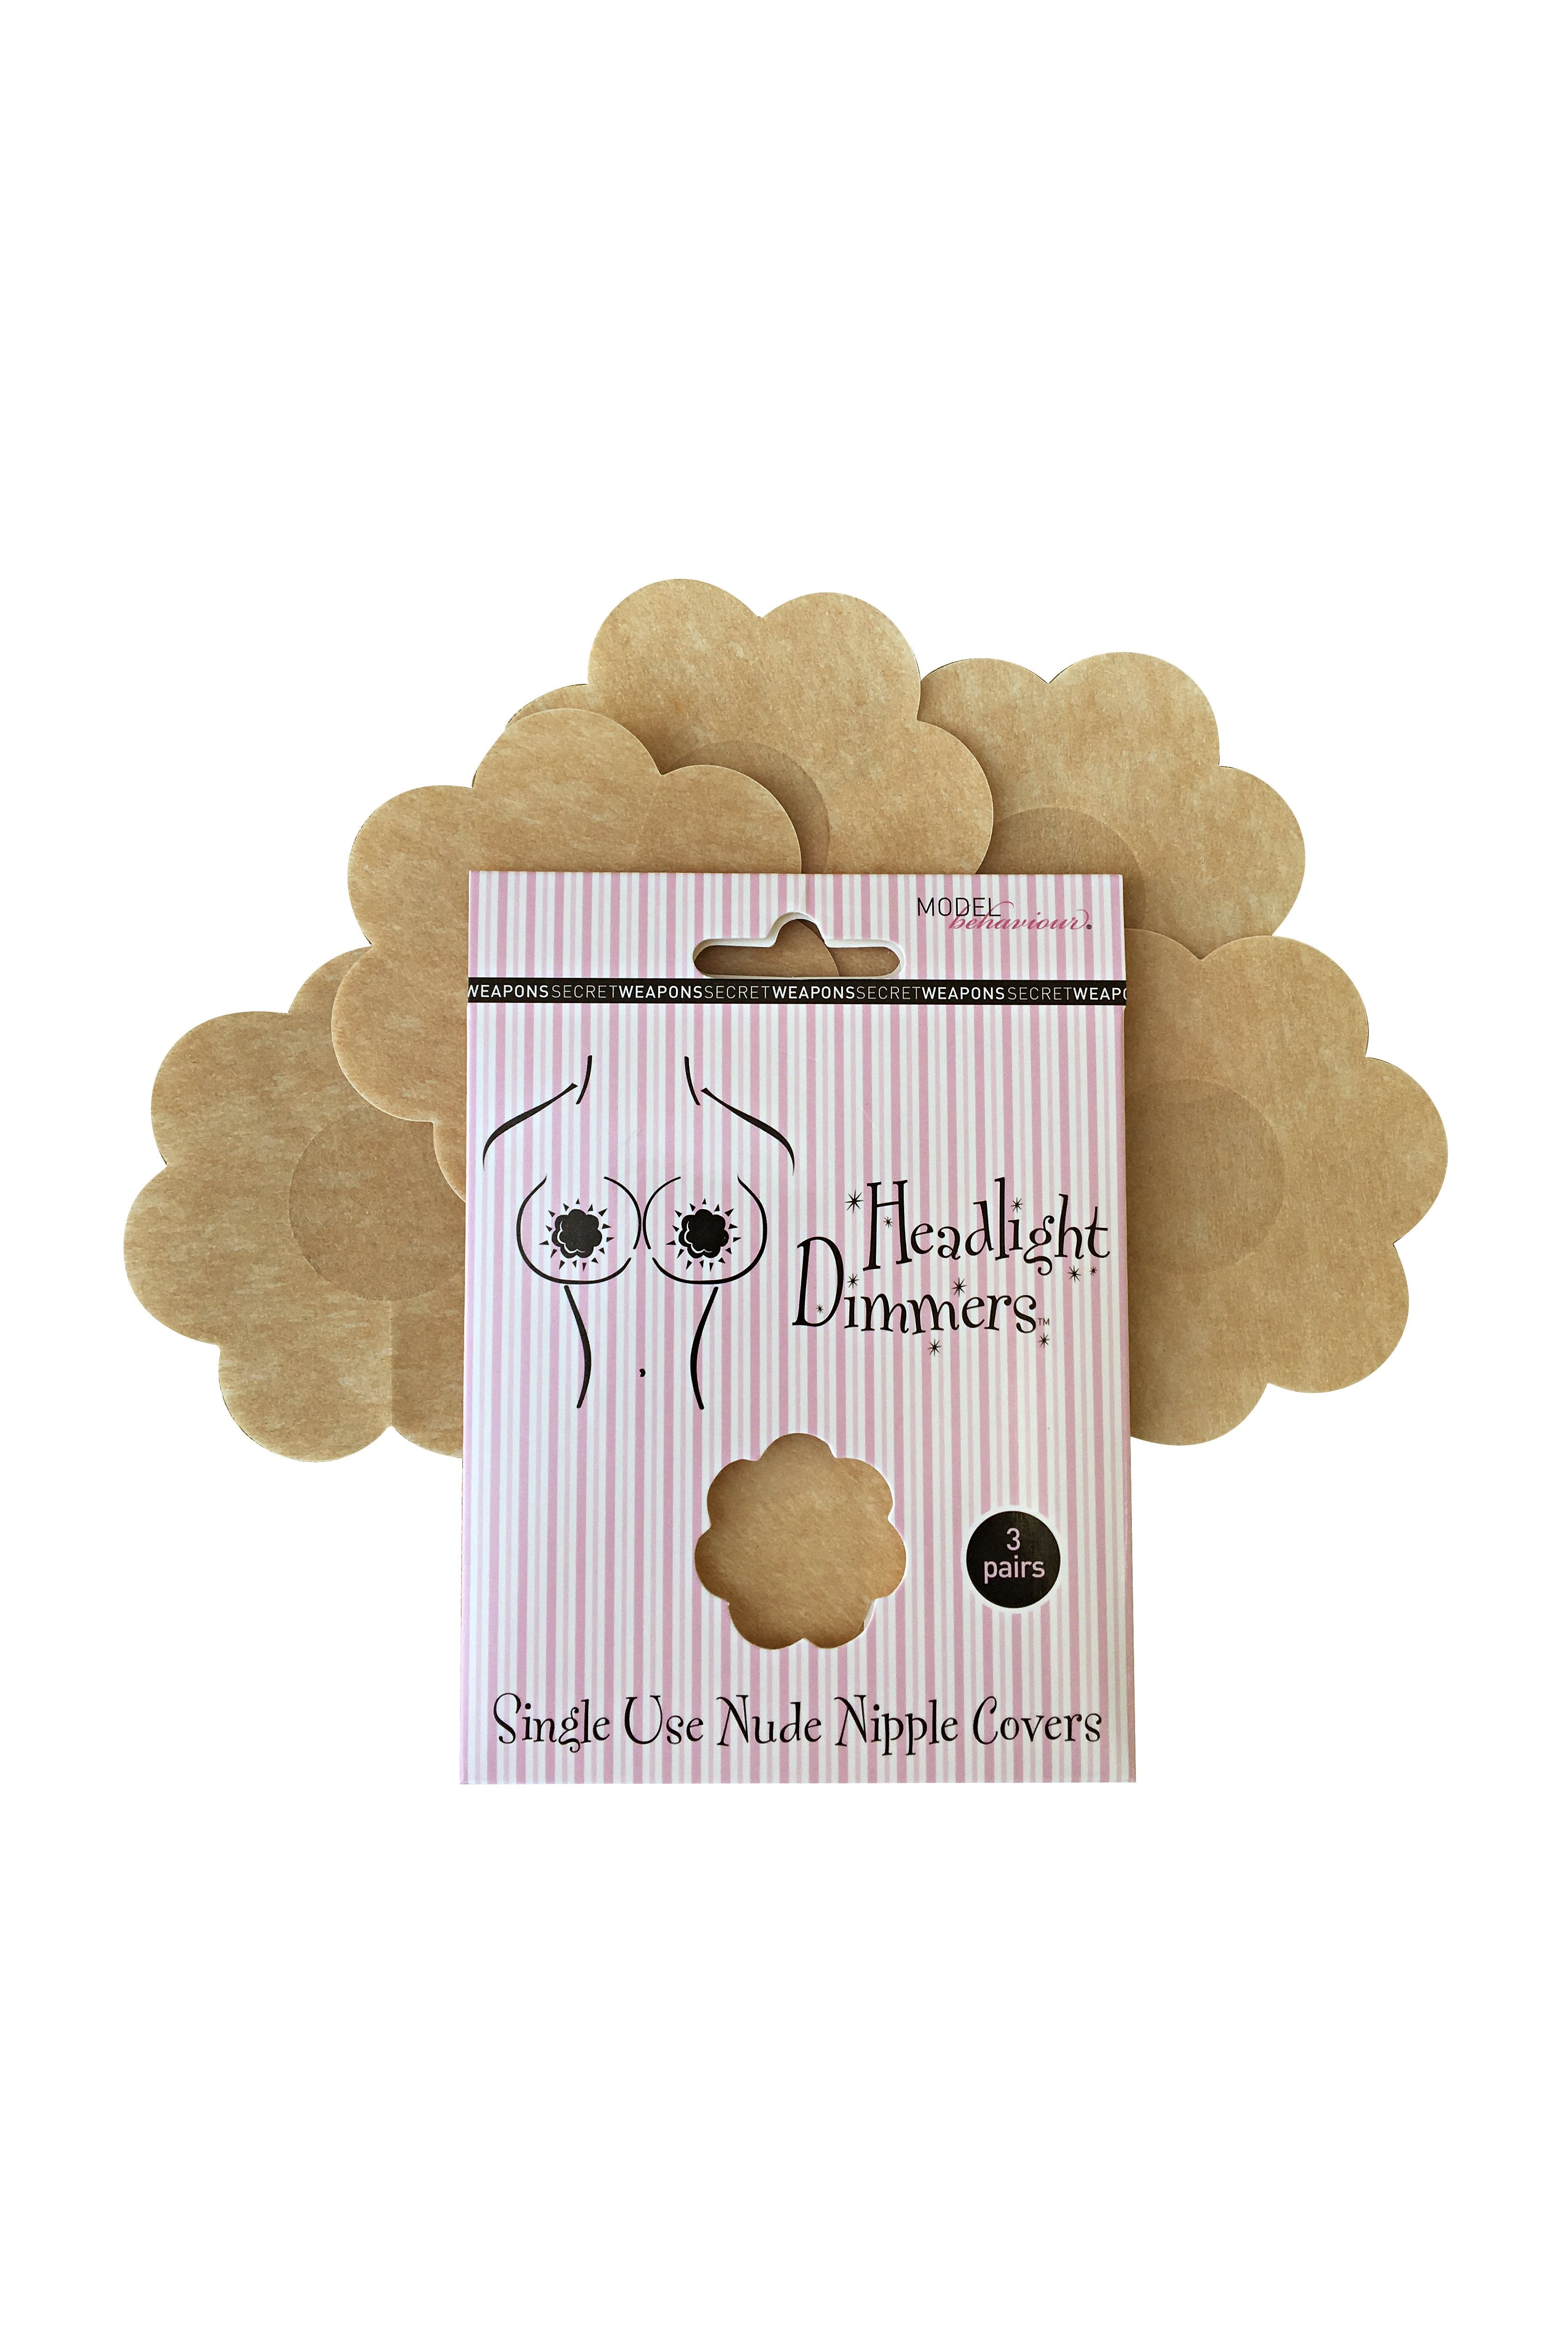 Secret Weapons Adhesive Nipple Covers - 3 Pack SW043 - Adhesives Nude / One Size  Available at Illusions Lingerie